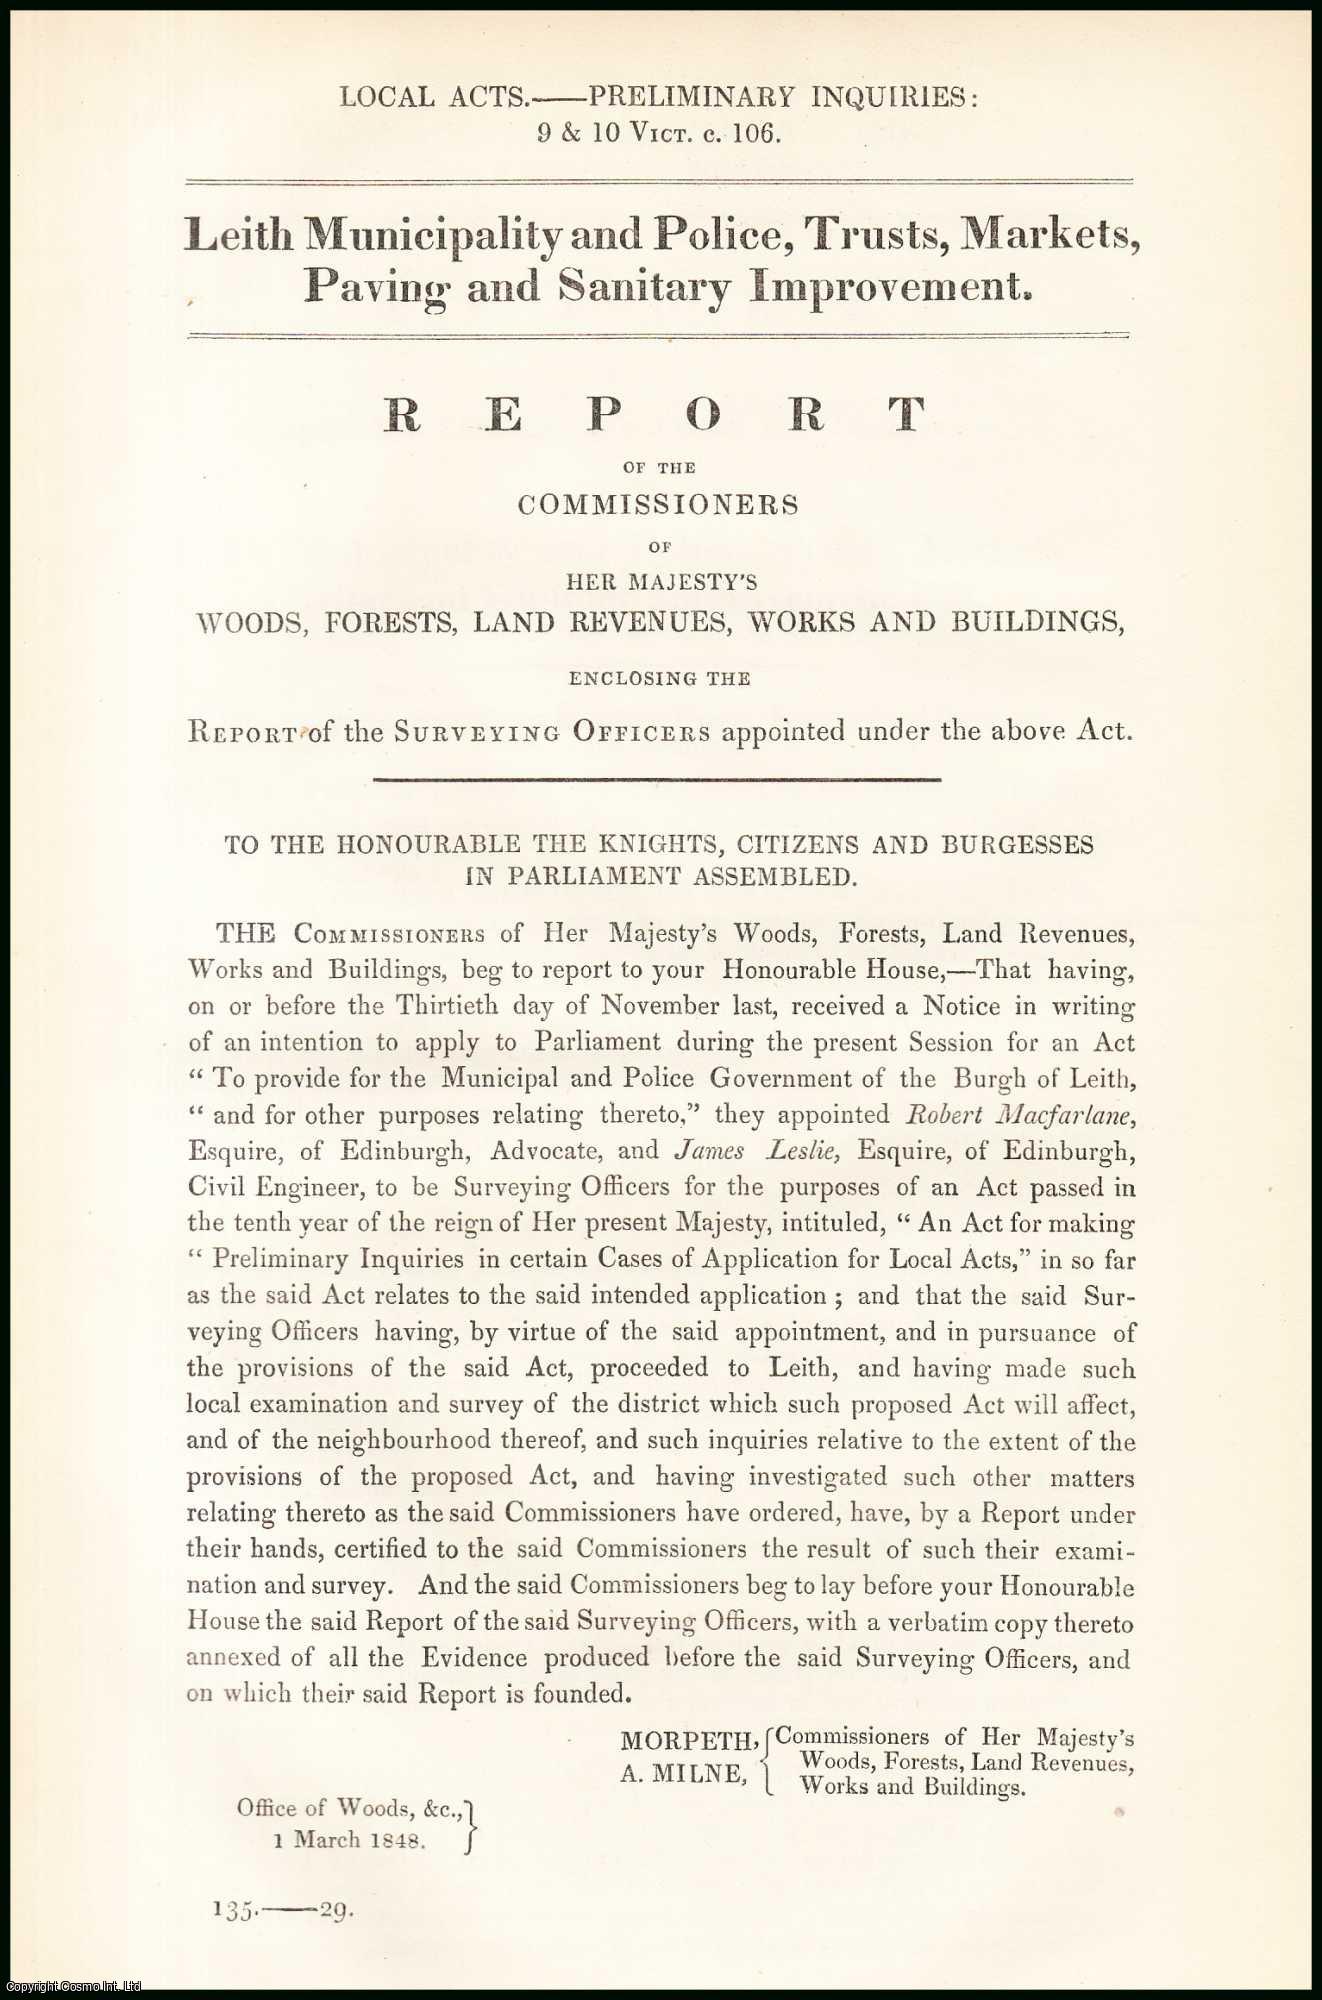 Robert and James Macfarlane and Leslie - [Blue Book Report]. Leith Municipality and Police, Trusts, Markets, Paving and Sanitary Improvement; Preliminary Inquiry, Report by the Surveying Officers. Published by HMSO 1848.